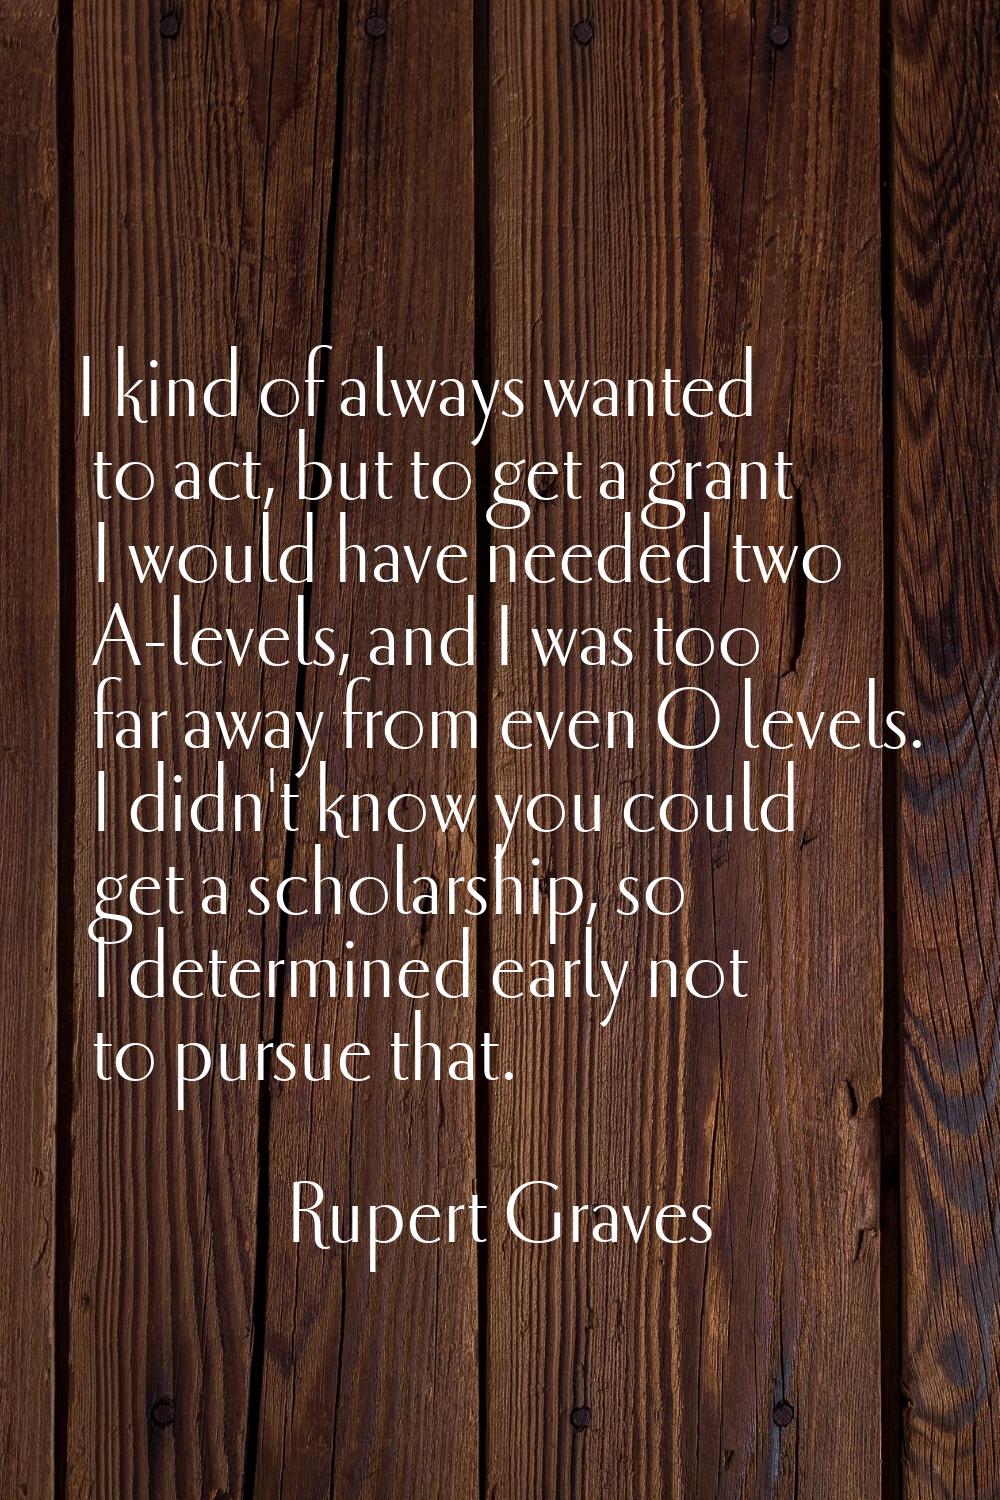 I kind of always wanted to act, but to get a grant I would have needed two A-levels, and I was too 